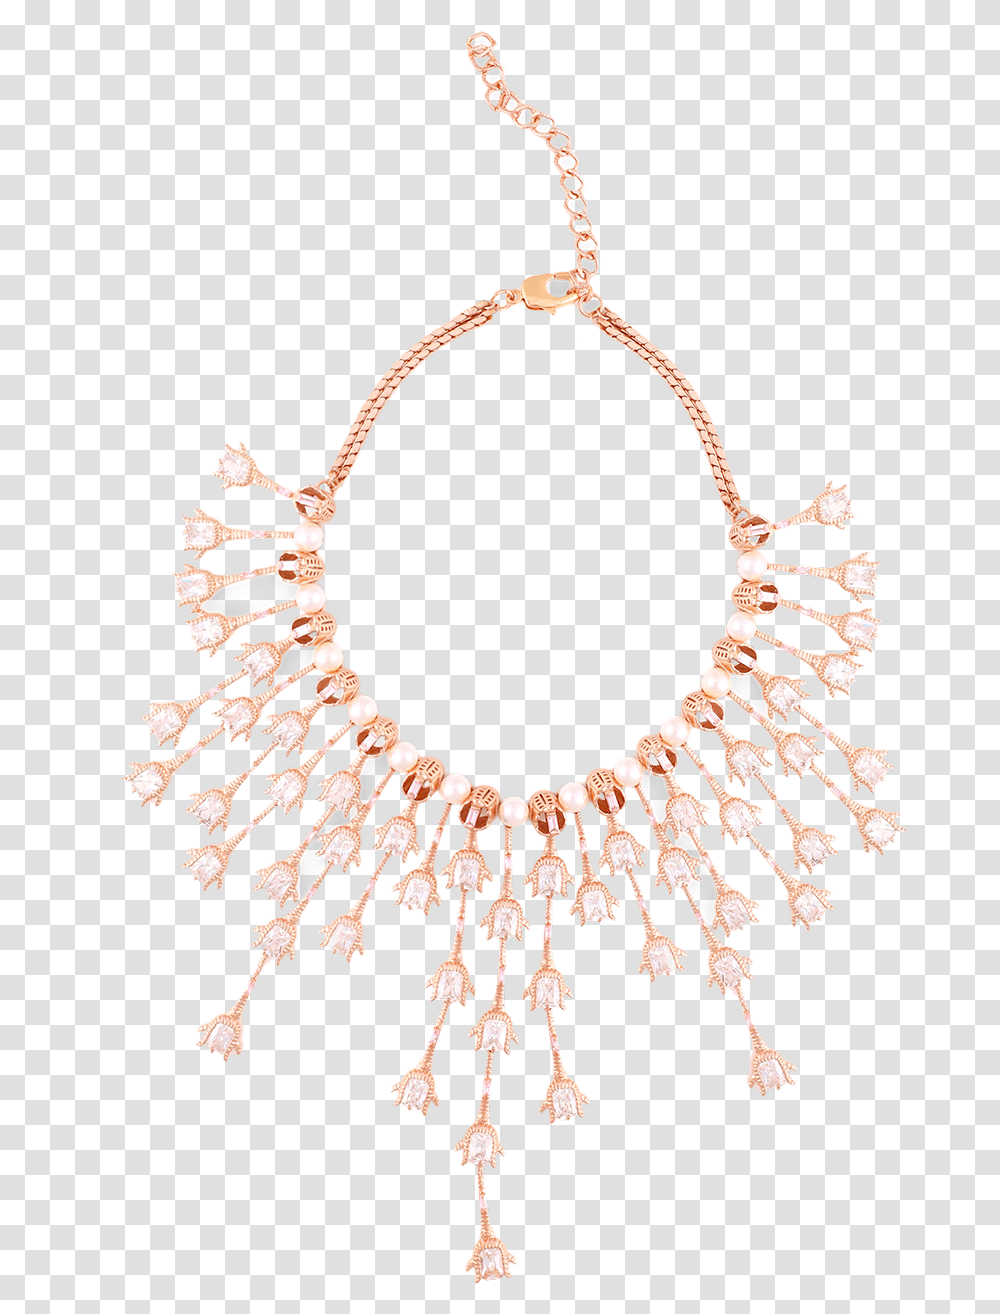 Gold Chain Dollar Sign Cluster Rose Necklace Necklace, Jewelry, Accessories, Accessory, Chandelier Transparent Png